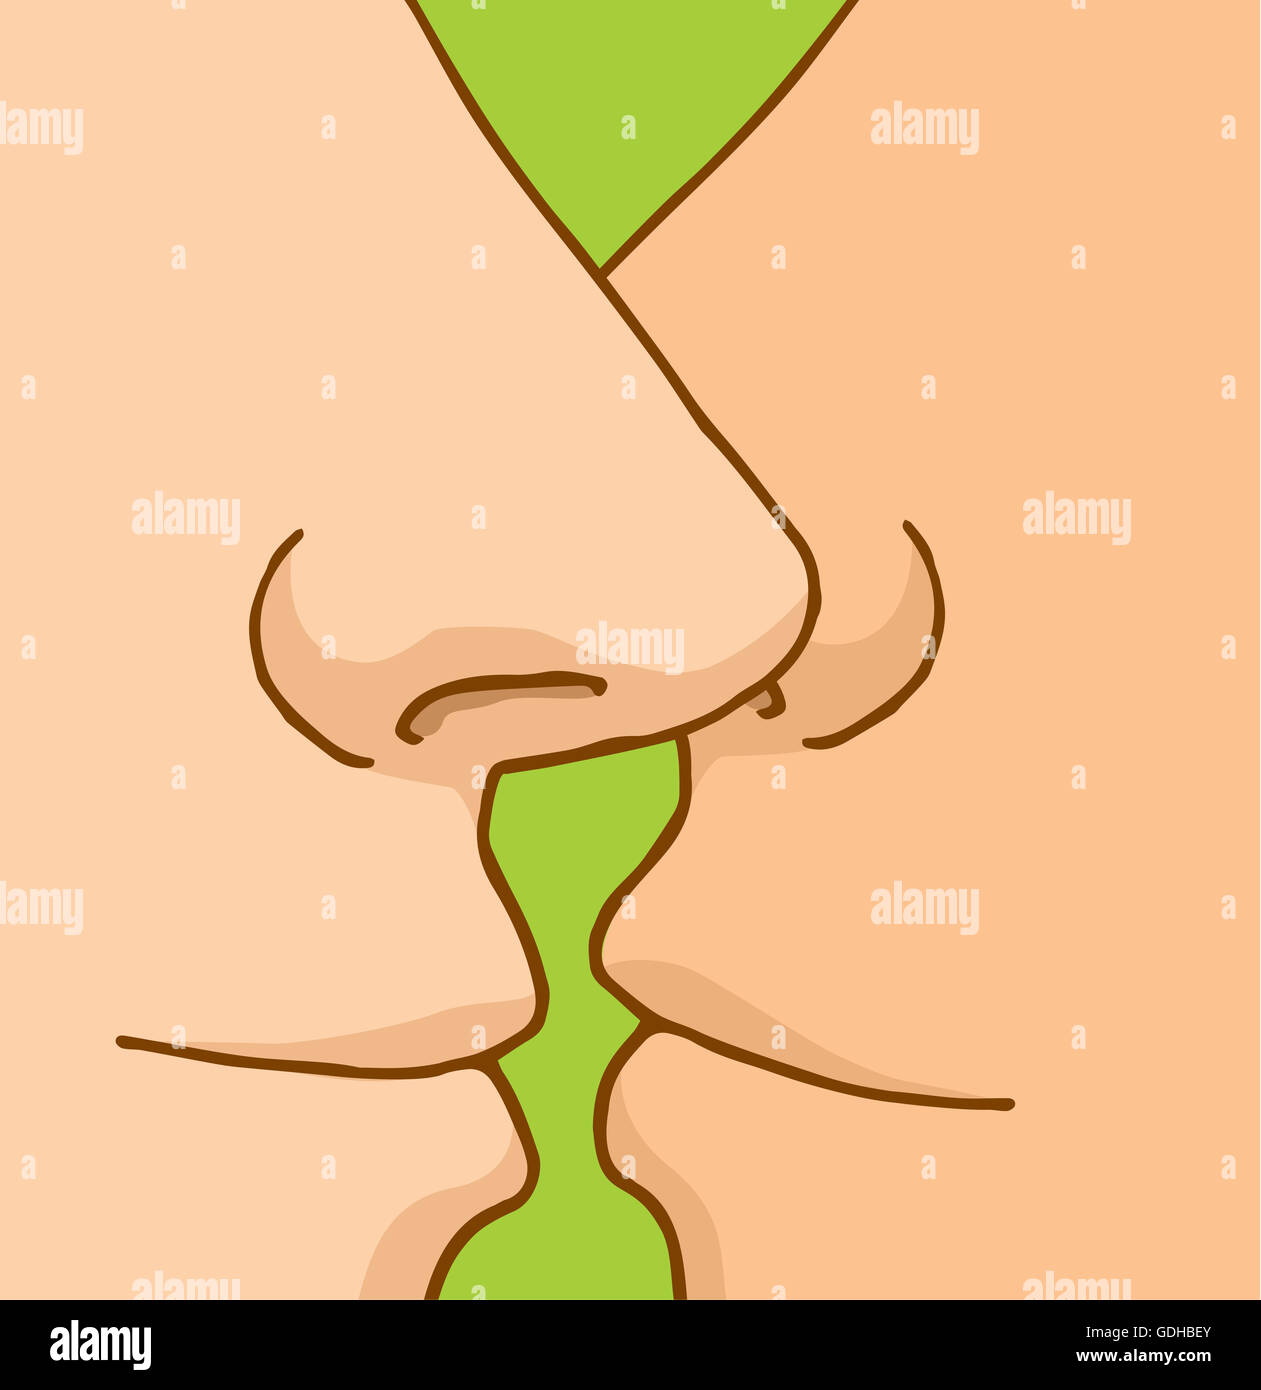 Cartoon illustration close up of two mouths about to kiss Stock Photo